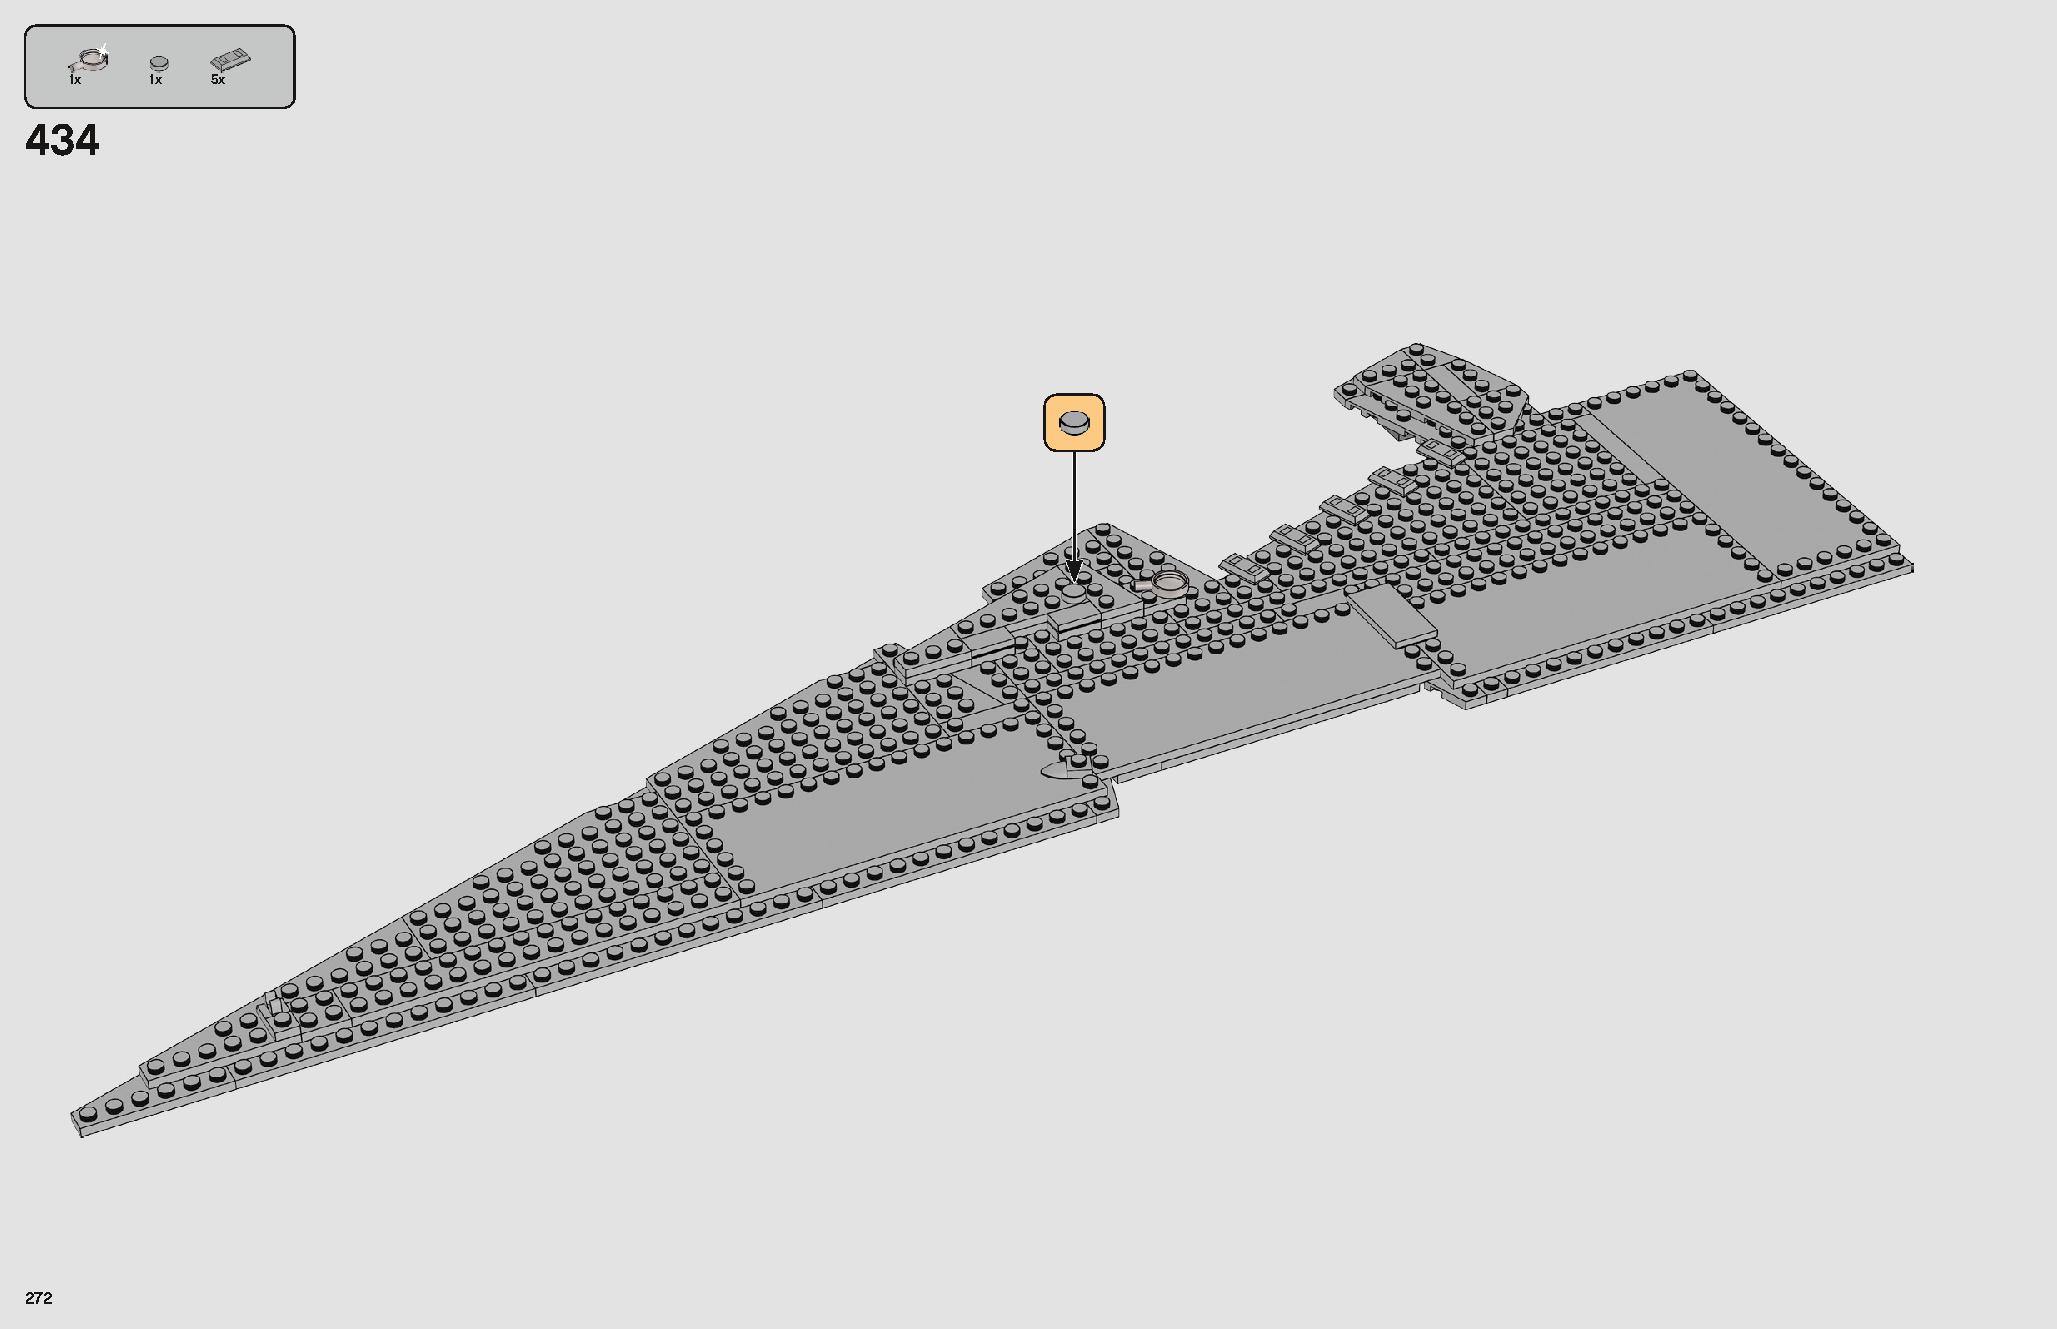 Imperial Star Destroyer 75252 レゴの商品情報 レゴの説明書・組立方法 272 page